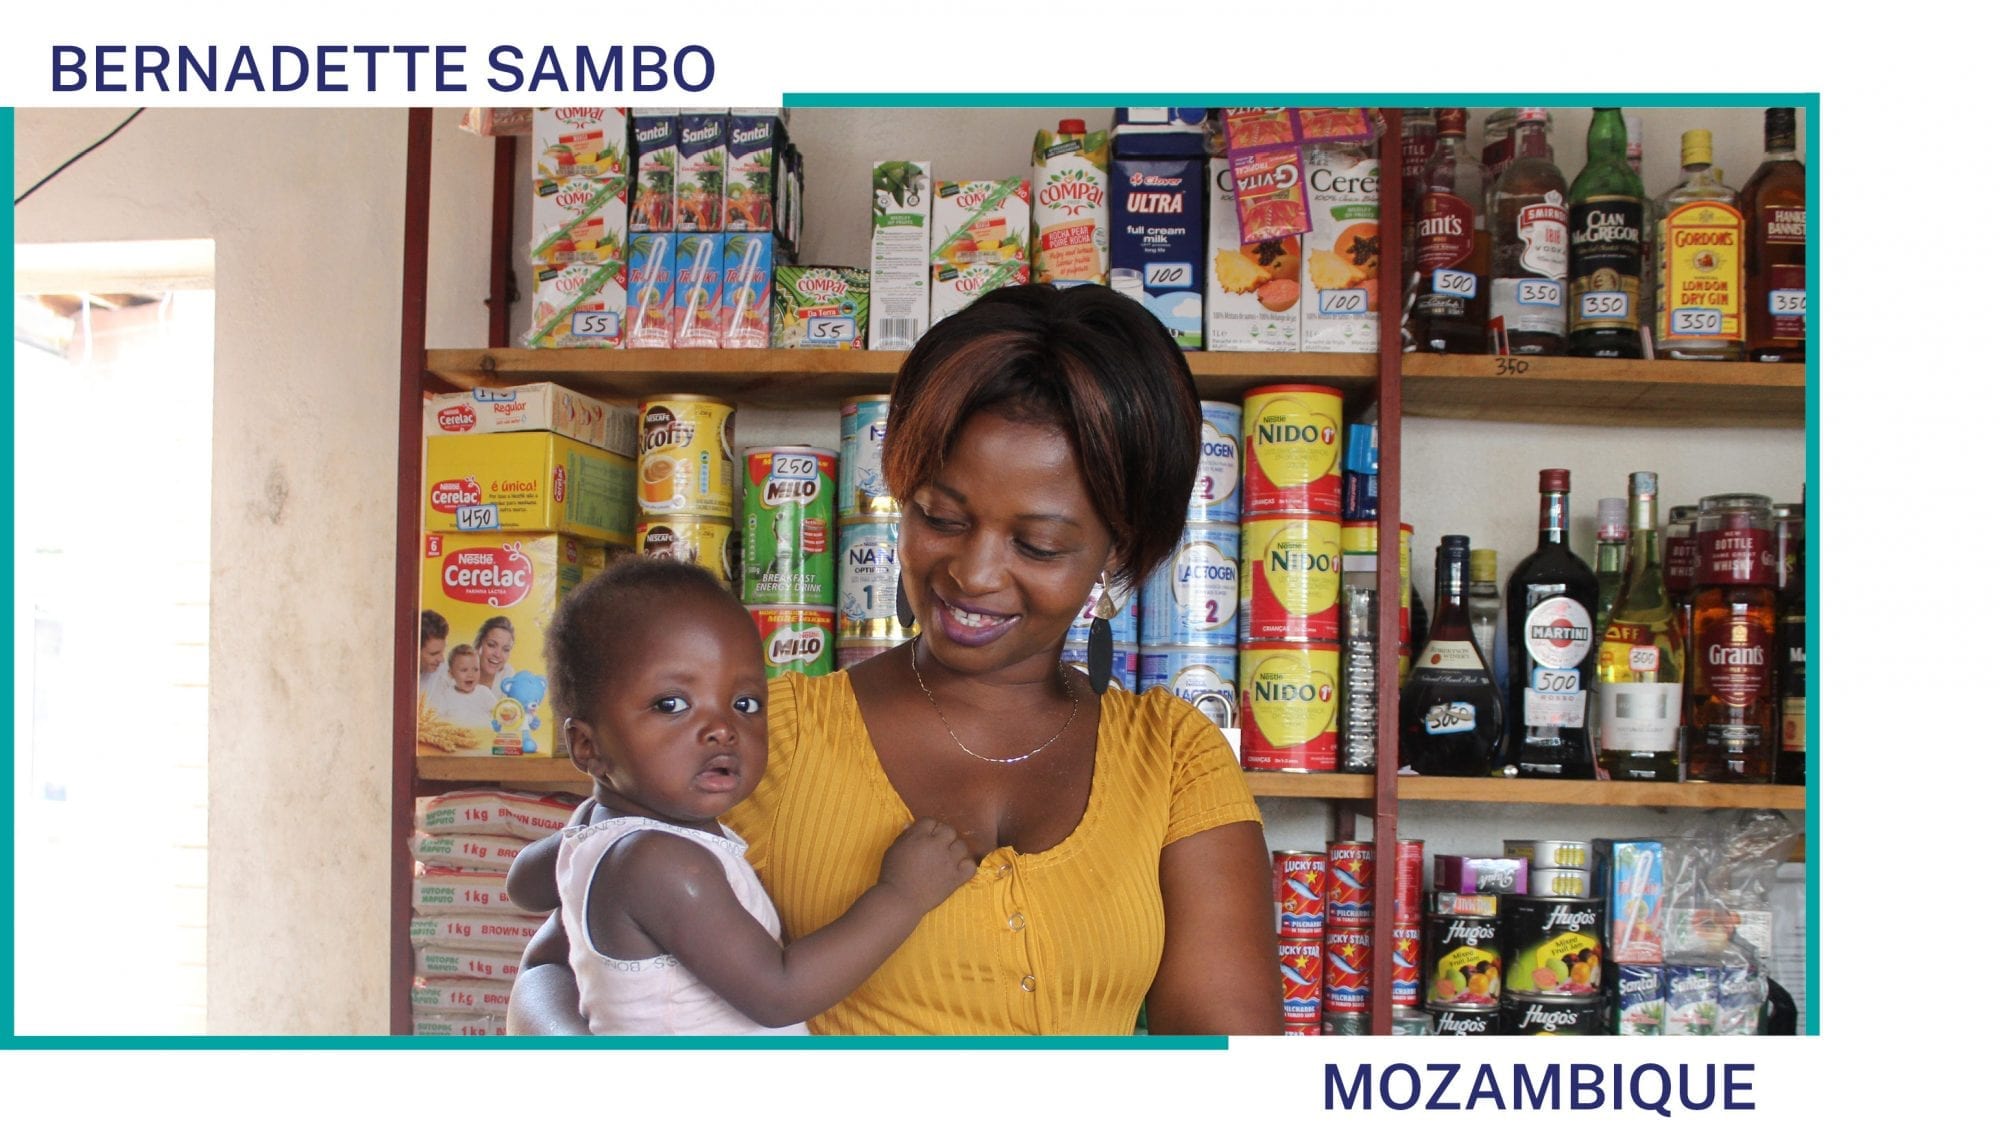 Bernadette Sambo holds her child in her shop in Mozambique